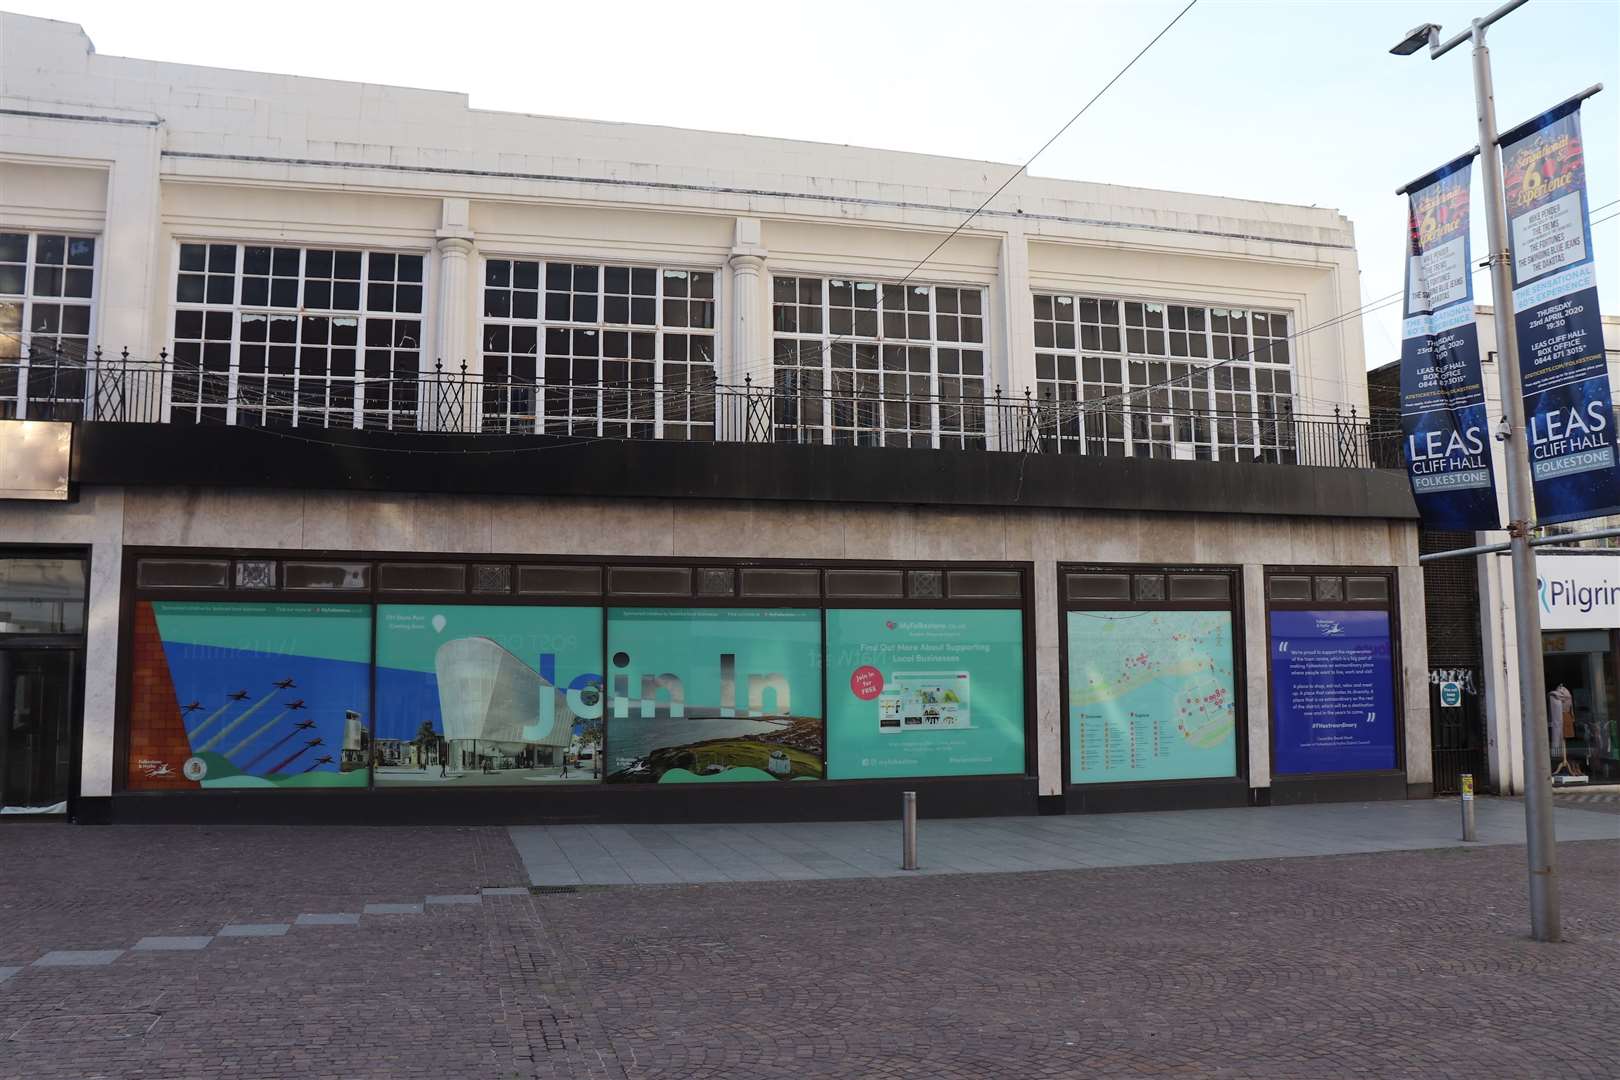 The new vinyl window display at Folkestone's former Debenhams store was installed in May